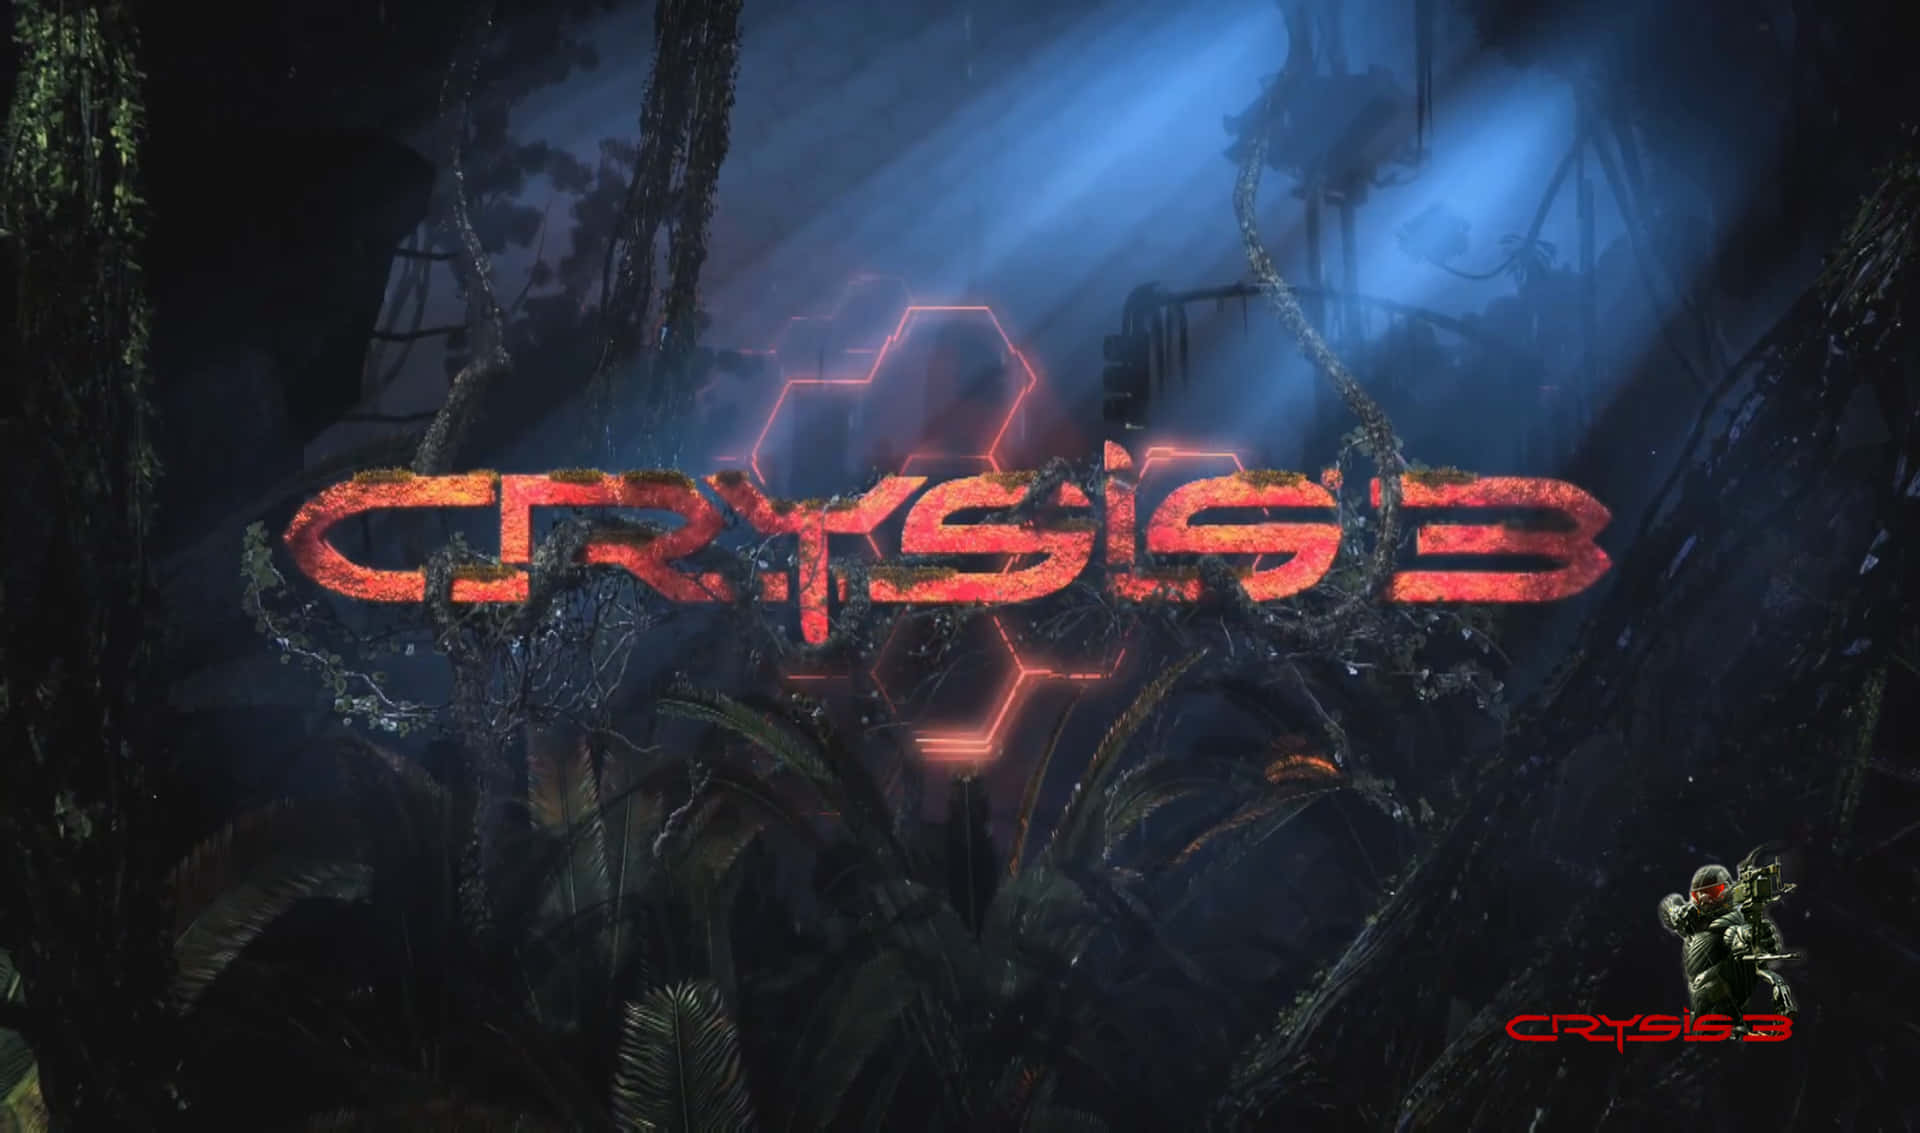 Take on Challenges in Crysis 3